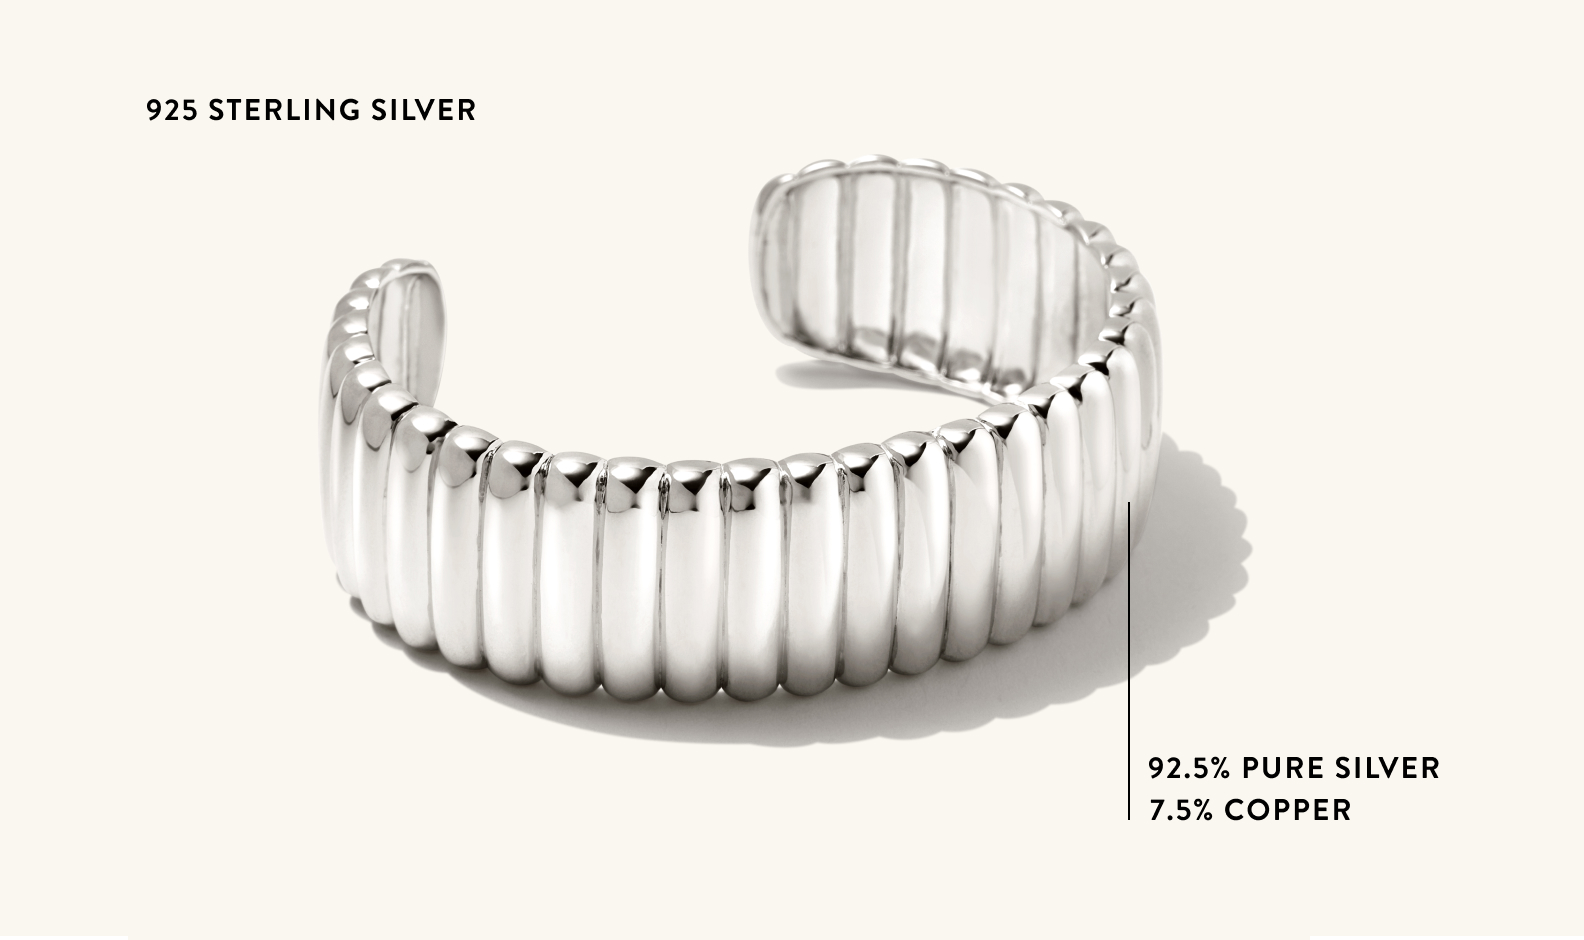 HOW DOES 925 STERLING SILVER vs PURE SILVER